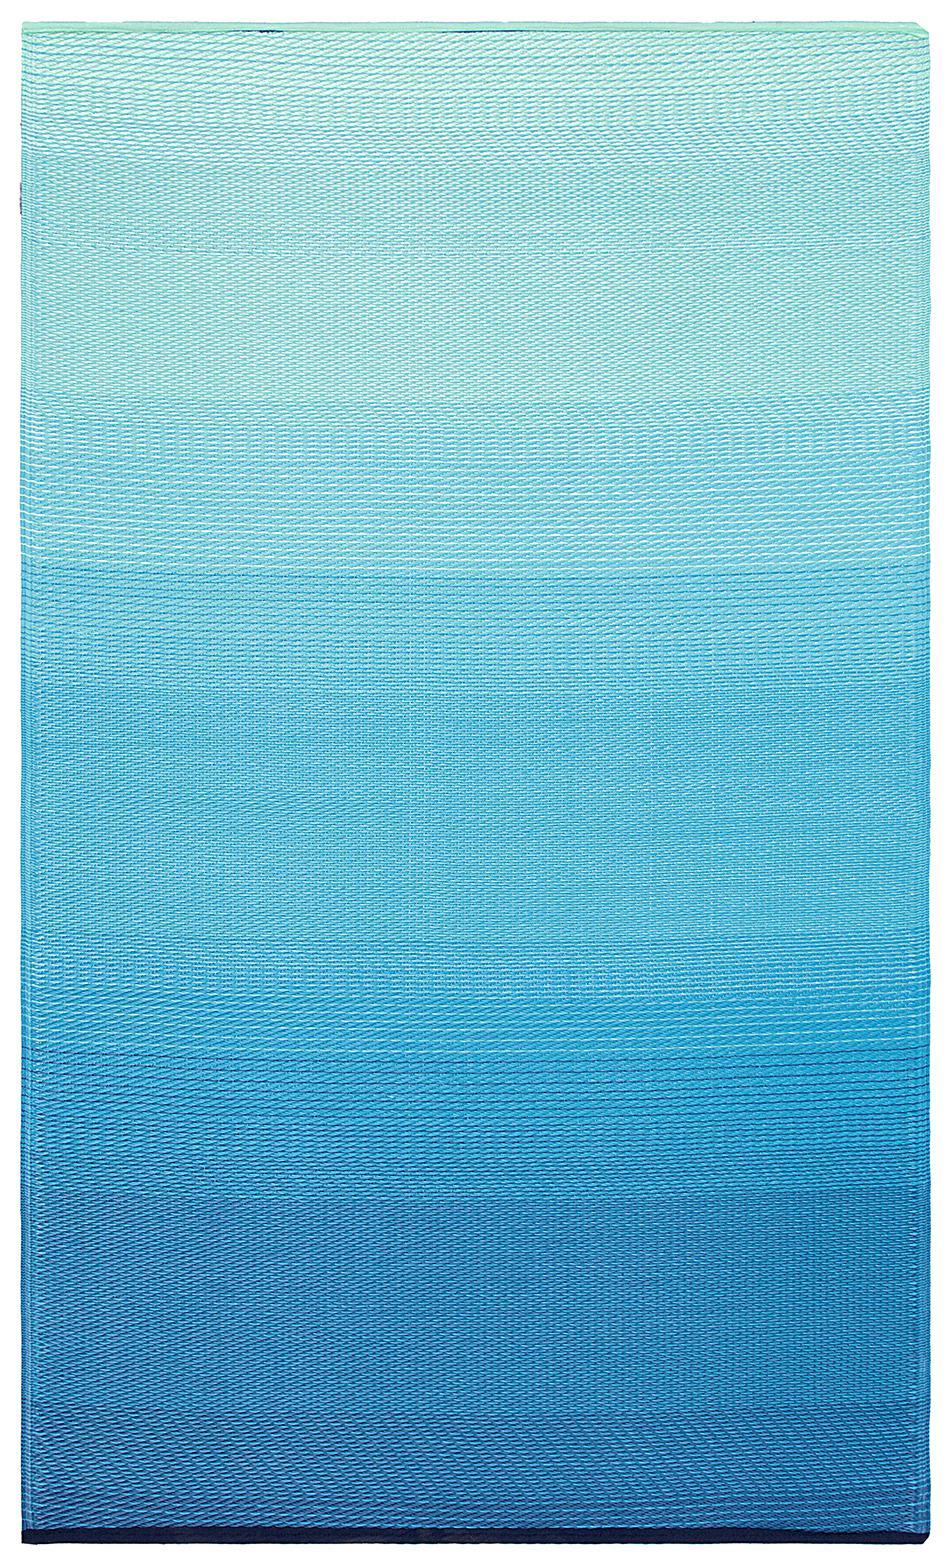 180x270 cm Recycled Plastic Outdoor Rug and Mat Big Sur Teal